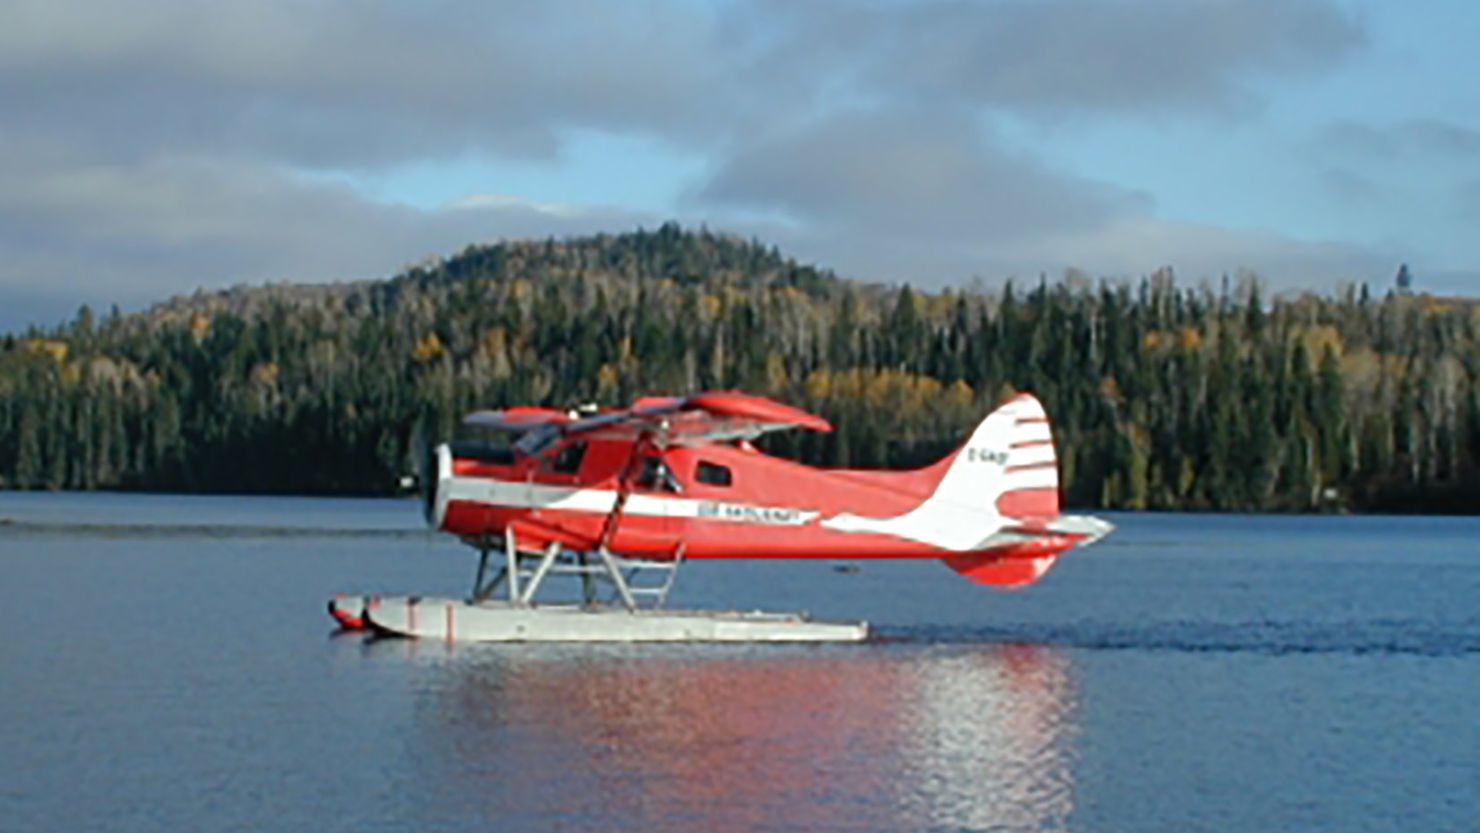 A de Havilland DHC-2 Beaver float plane like the one pictured here went down in Mistastin Lake.